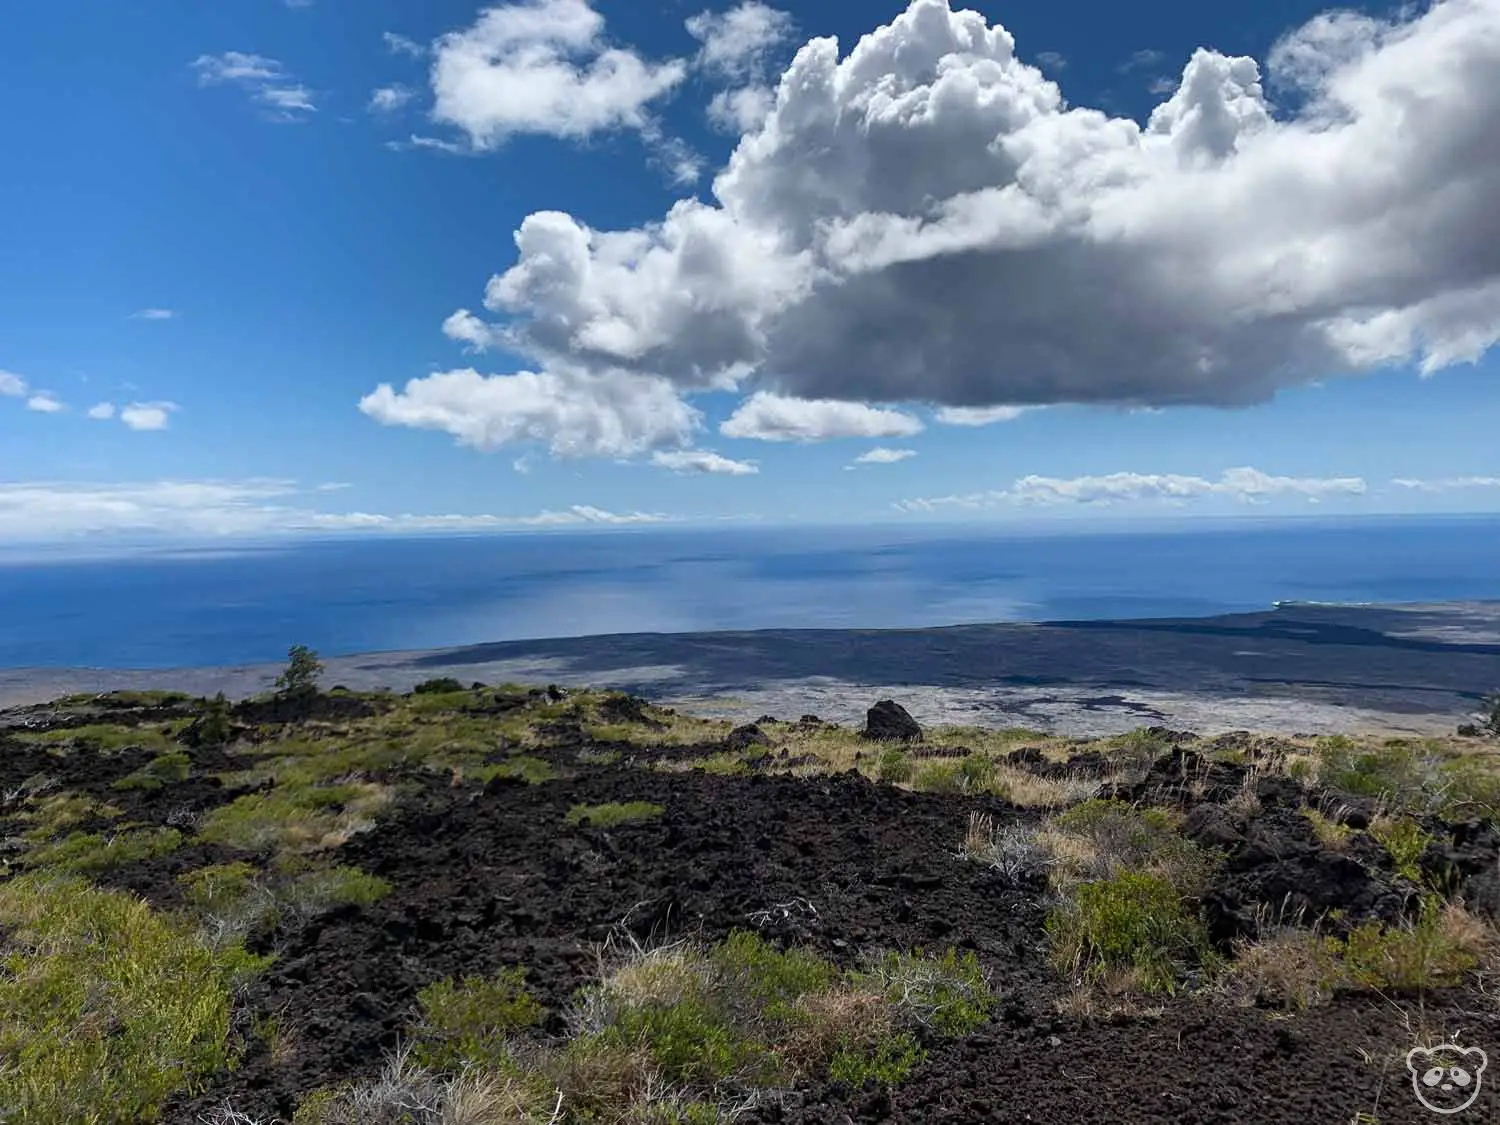 View of Pacific Ocean from Chain of Craters Drive.